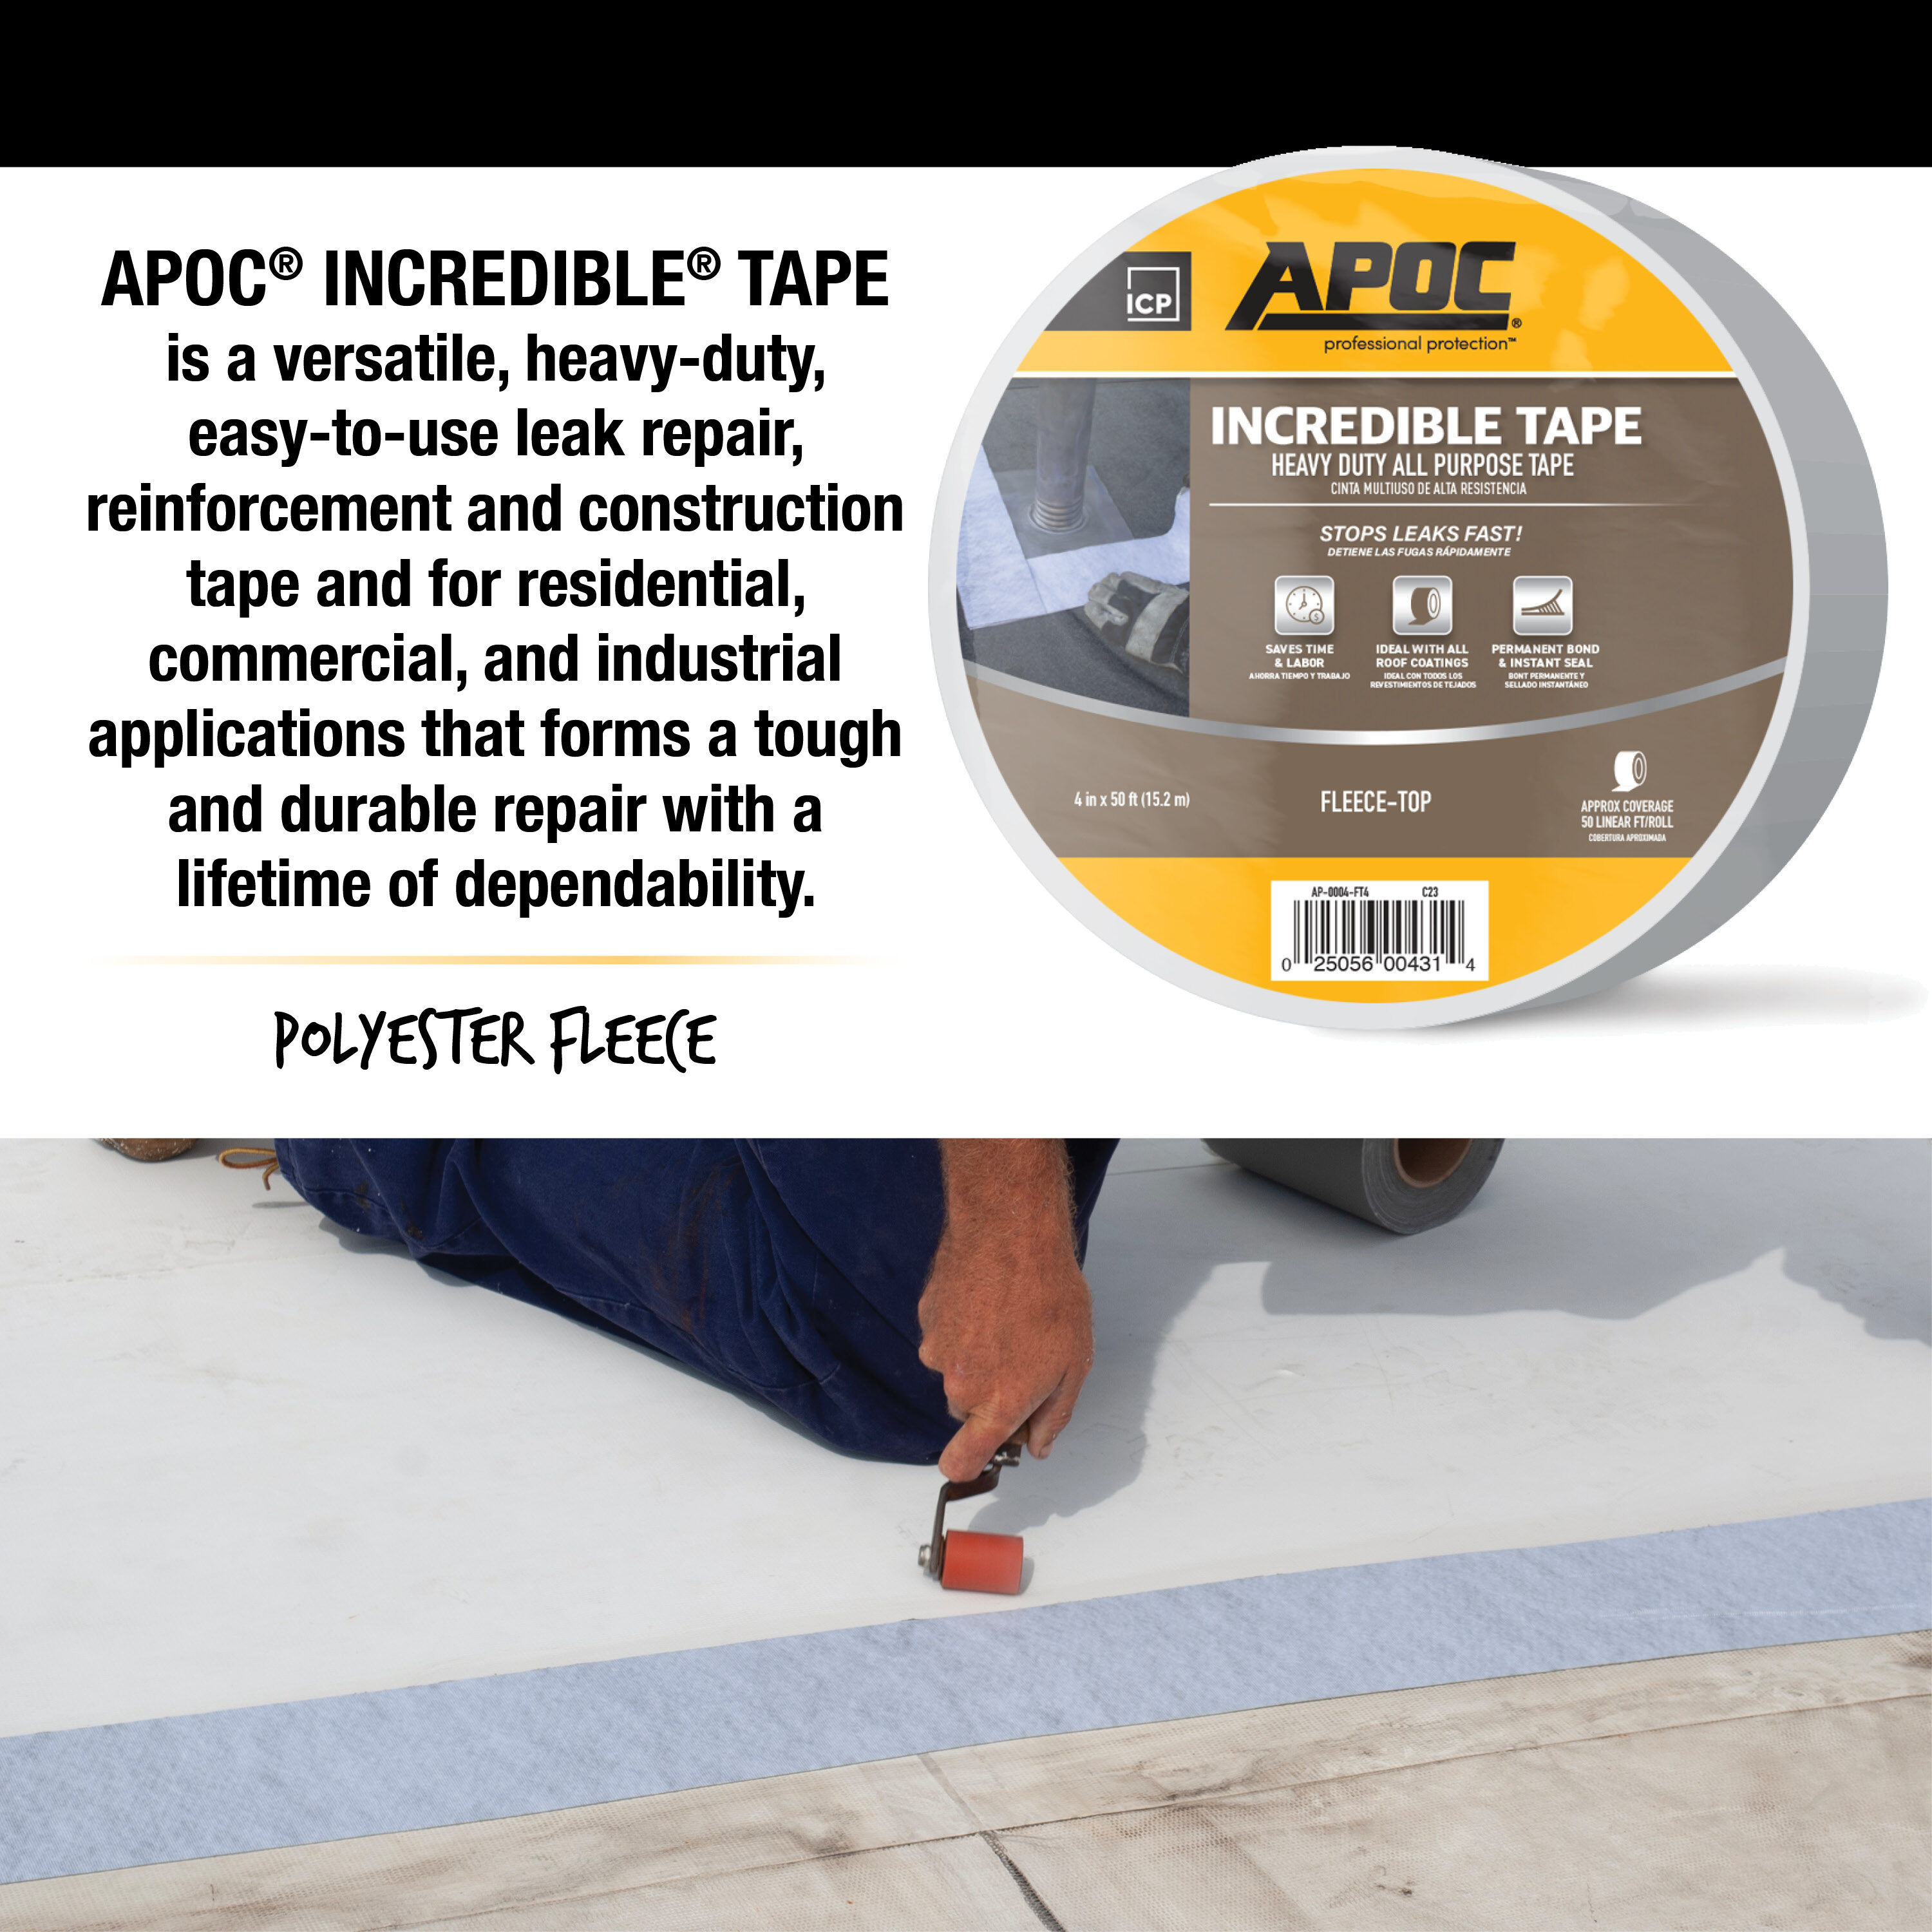 Apoc Incredible Tape 0.3-ft W x 50-ft L 15-sq ft Fleece-Top Roll Roofing in White | AP-0004-FT